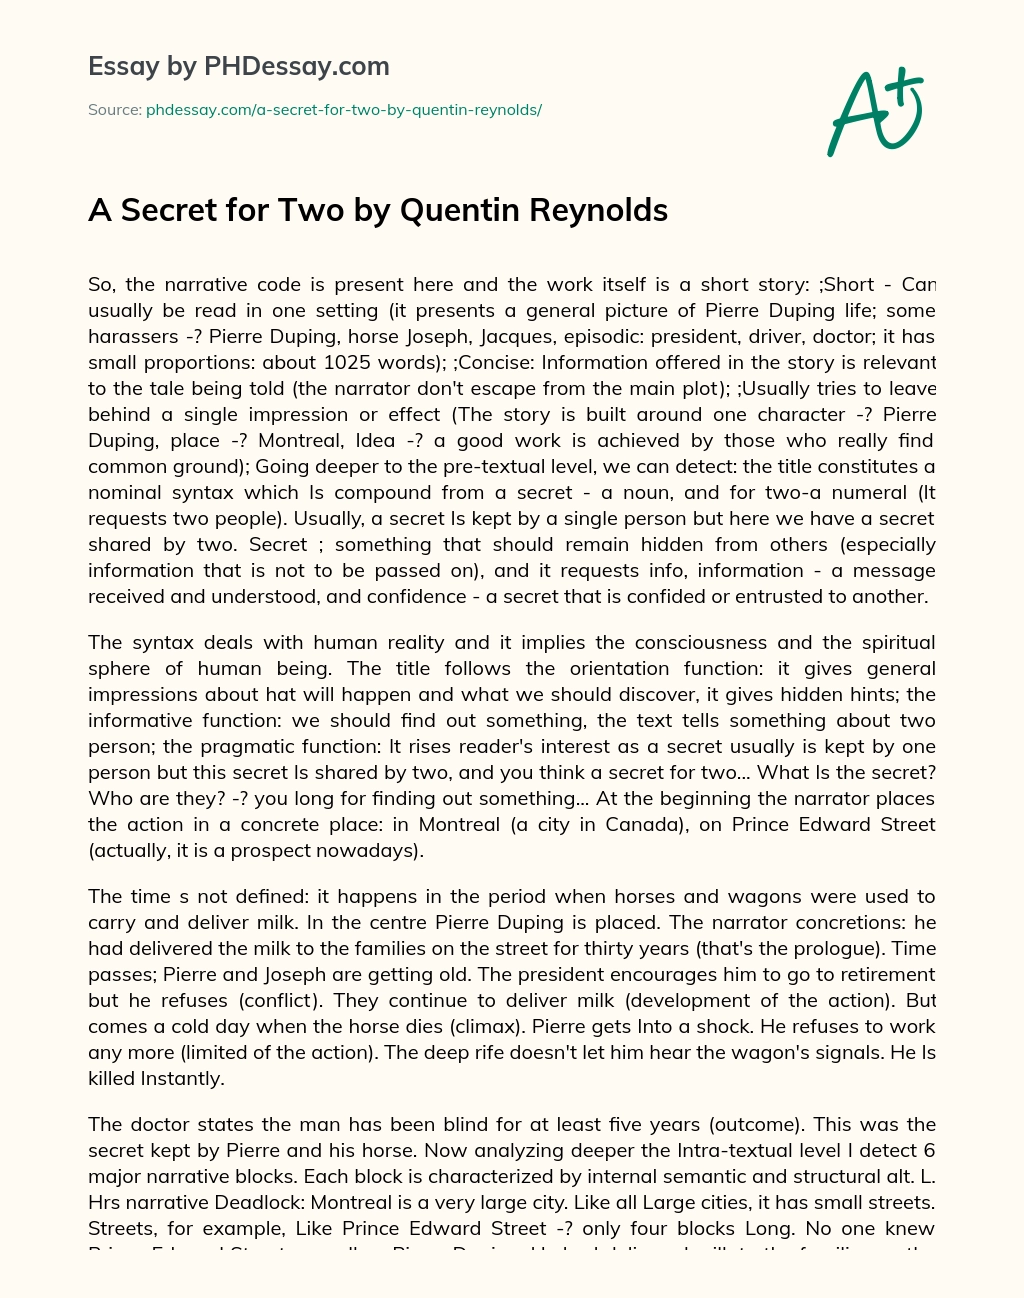 A Secret for Two by Quentin Reynolds essay